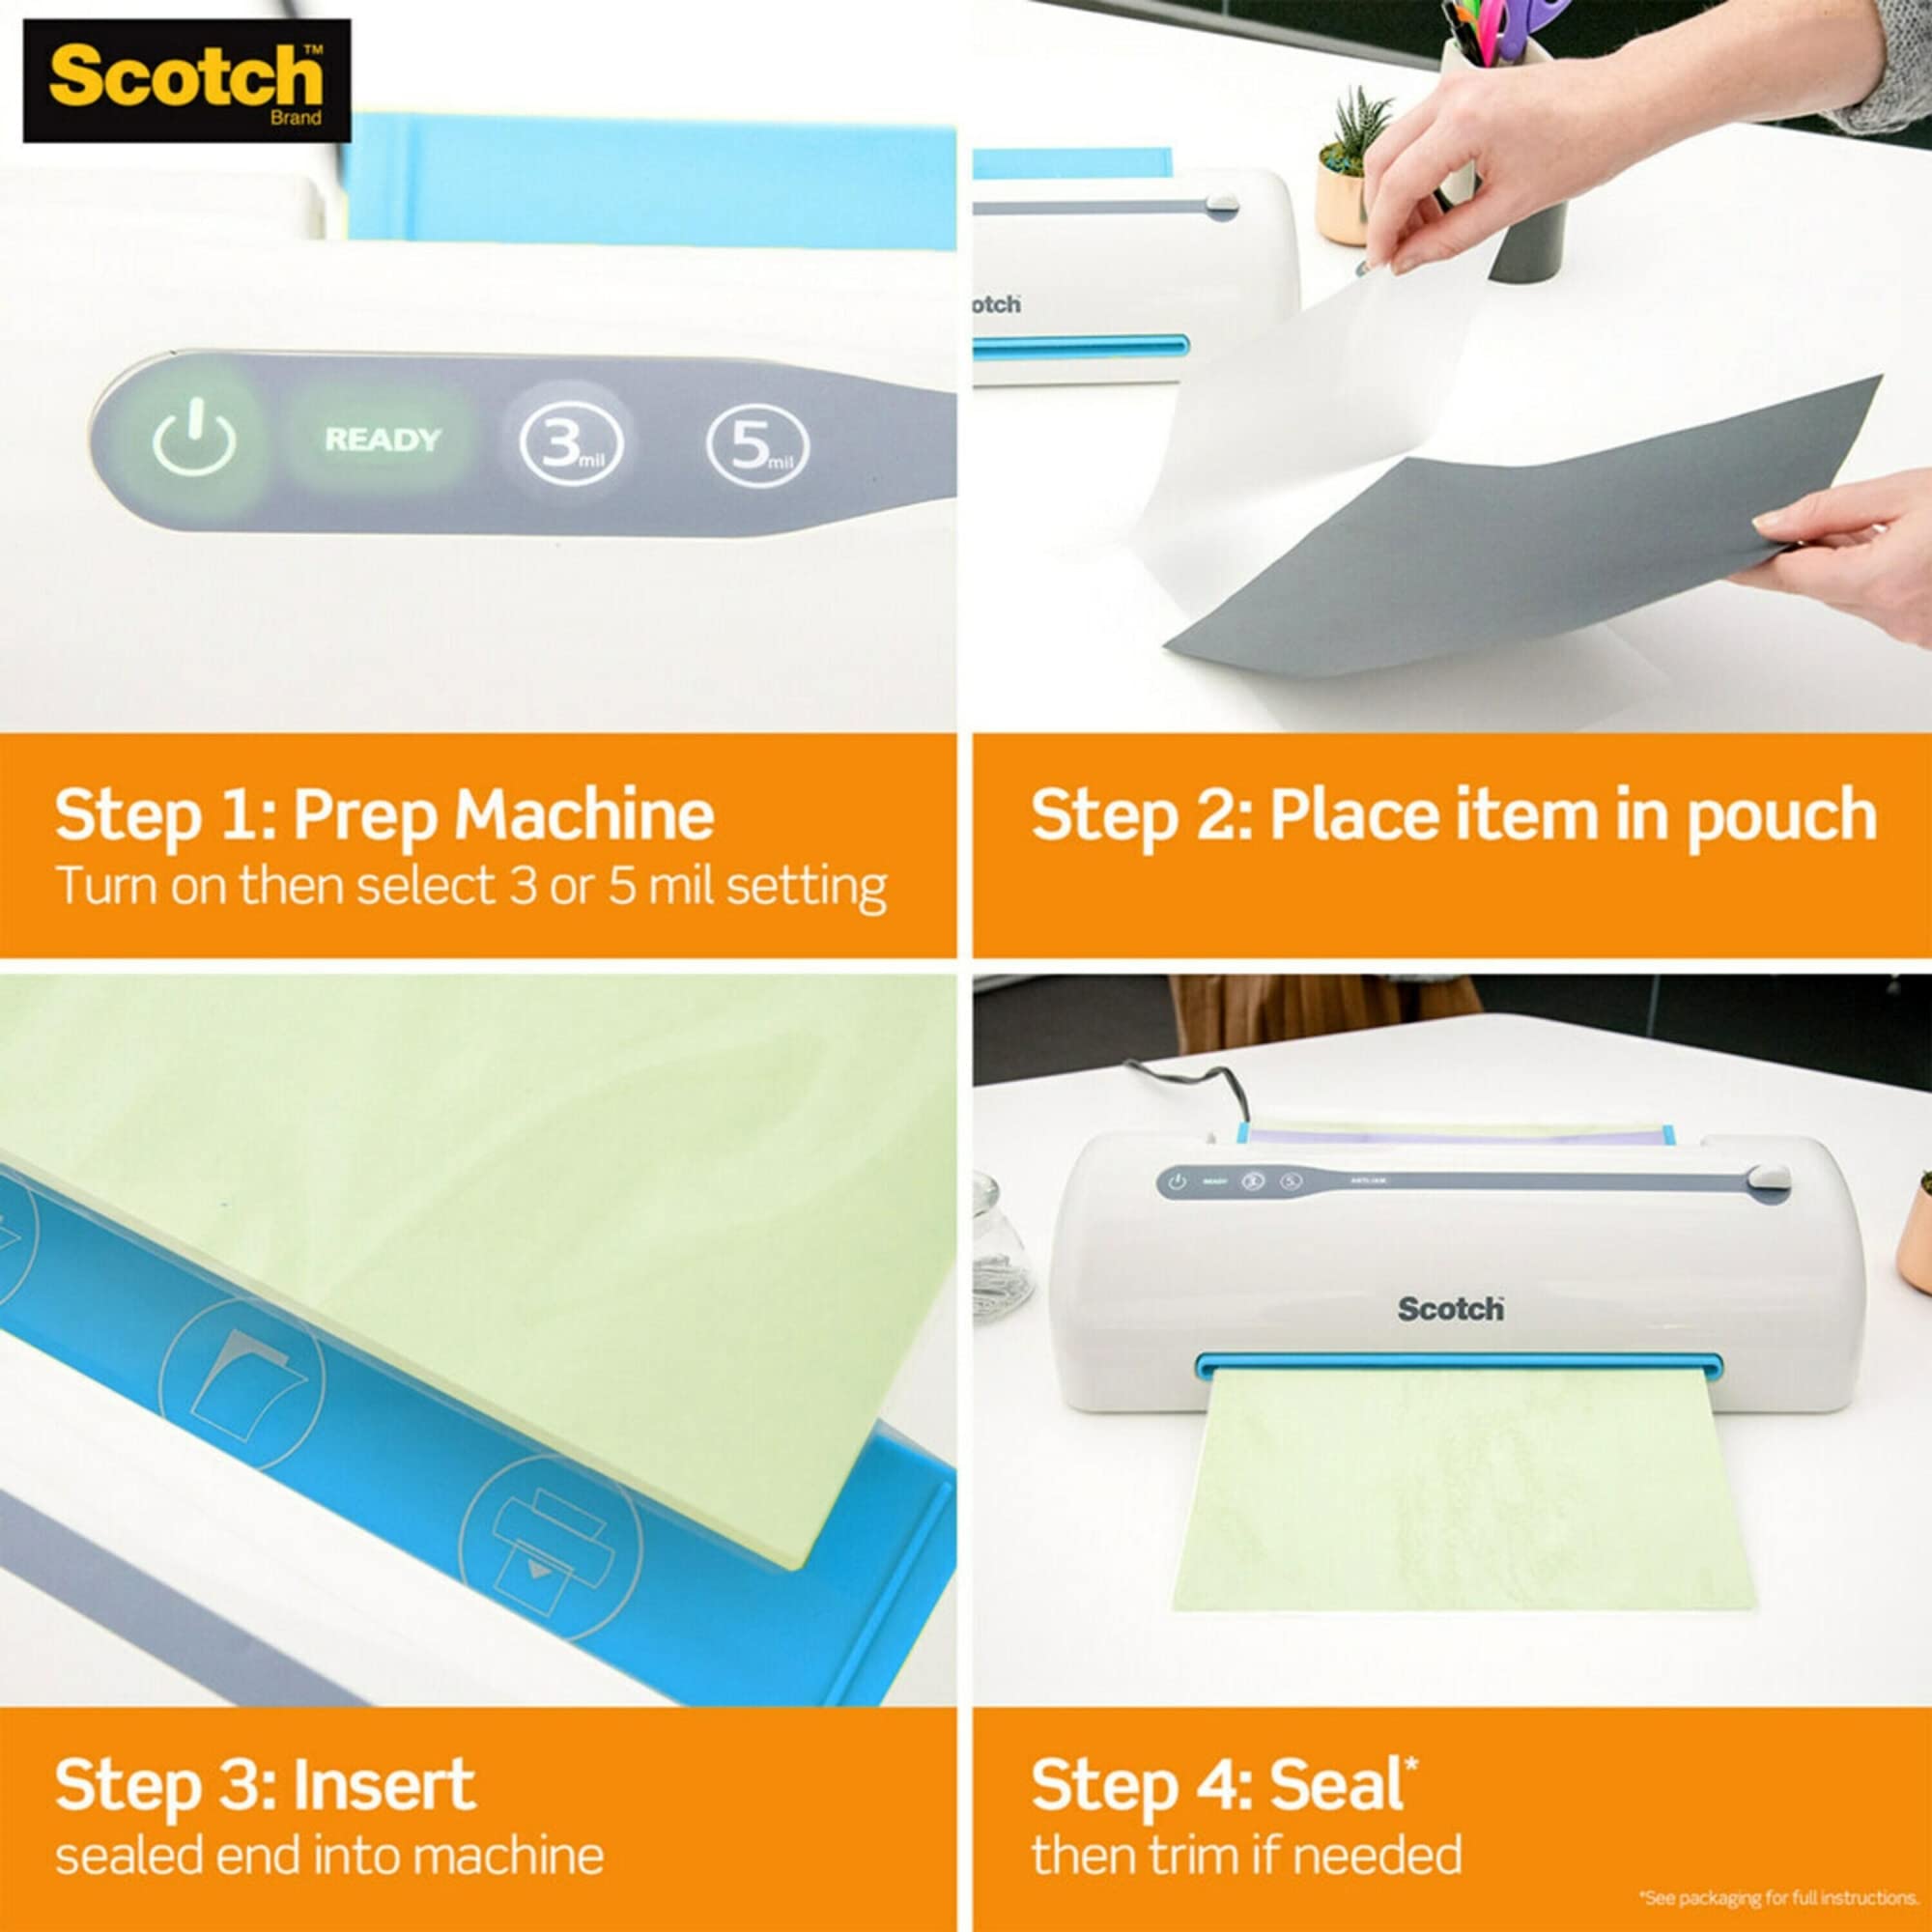 Scotch Thermal Laminator With Thermal Pouches, TL901X